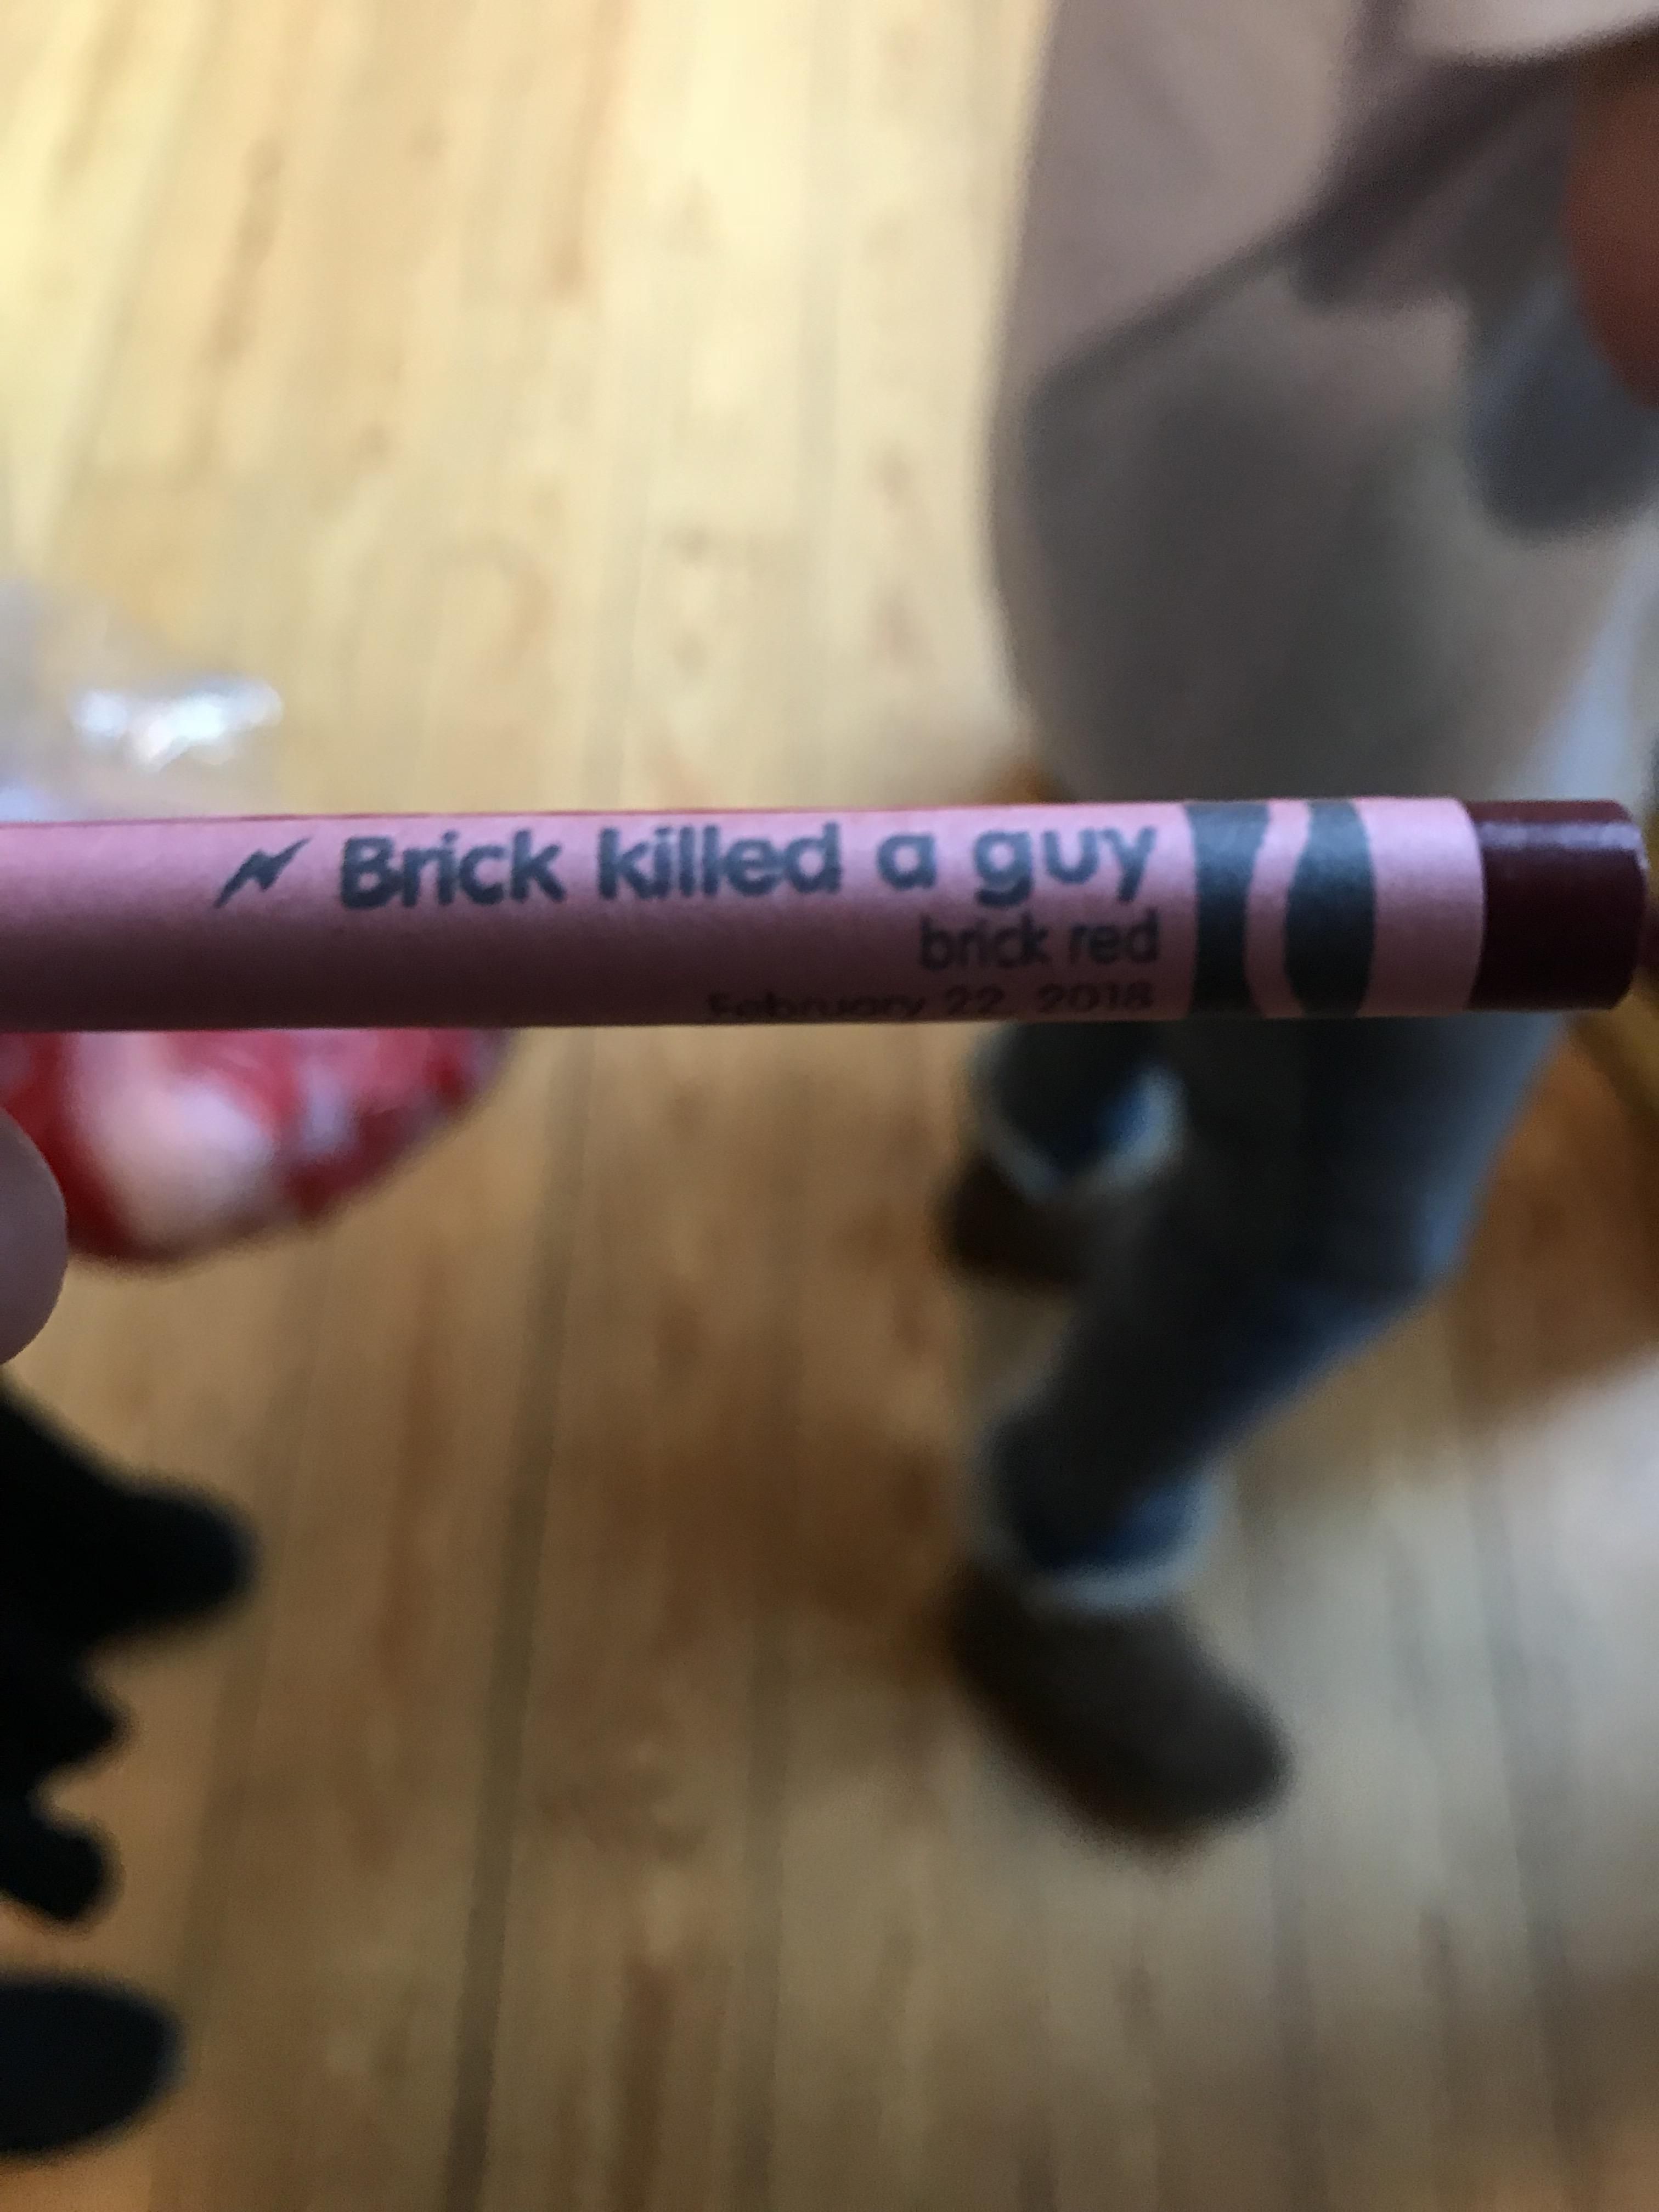 At the crayola museum, they let you make your own crayon labels